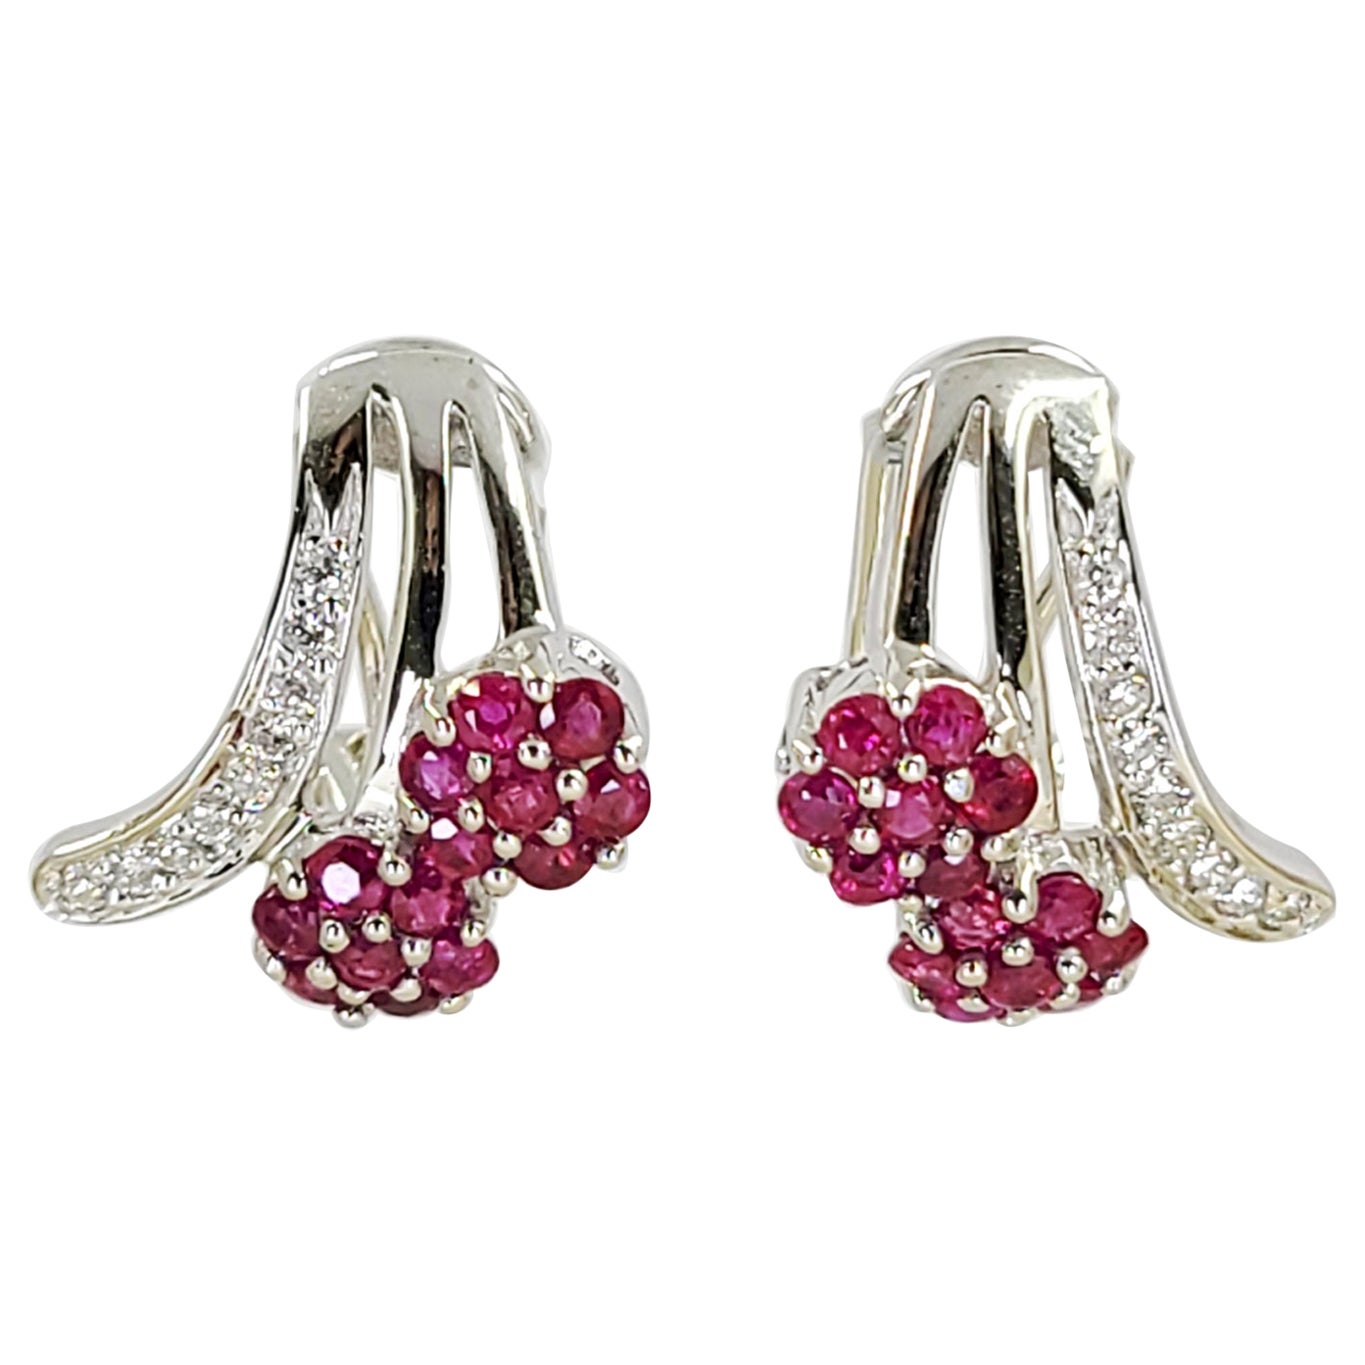 White Gold, Diamond, and Ruby Cluster Earrings